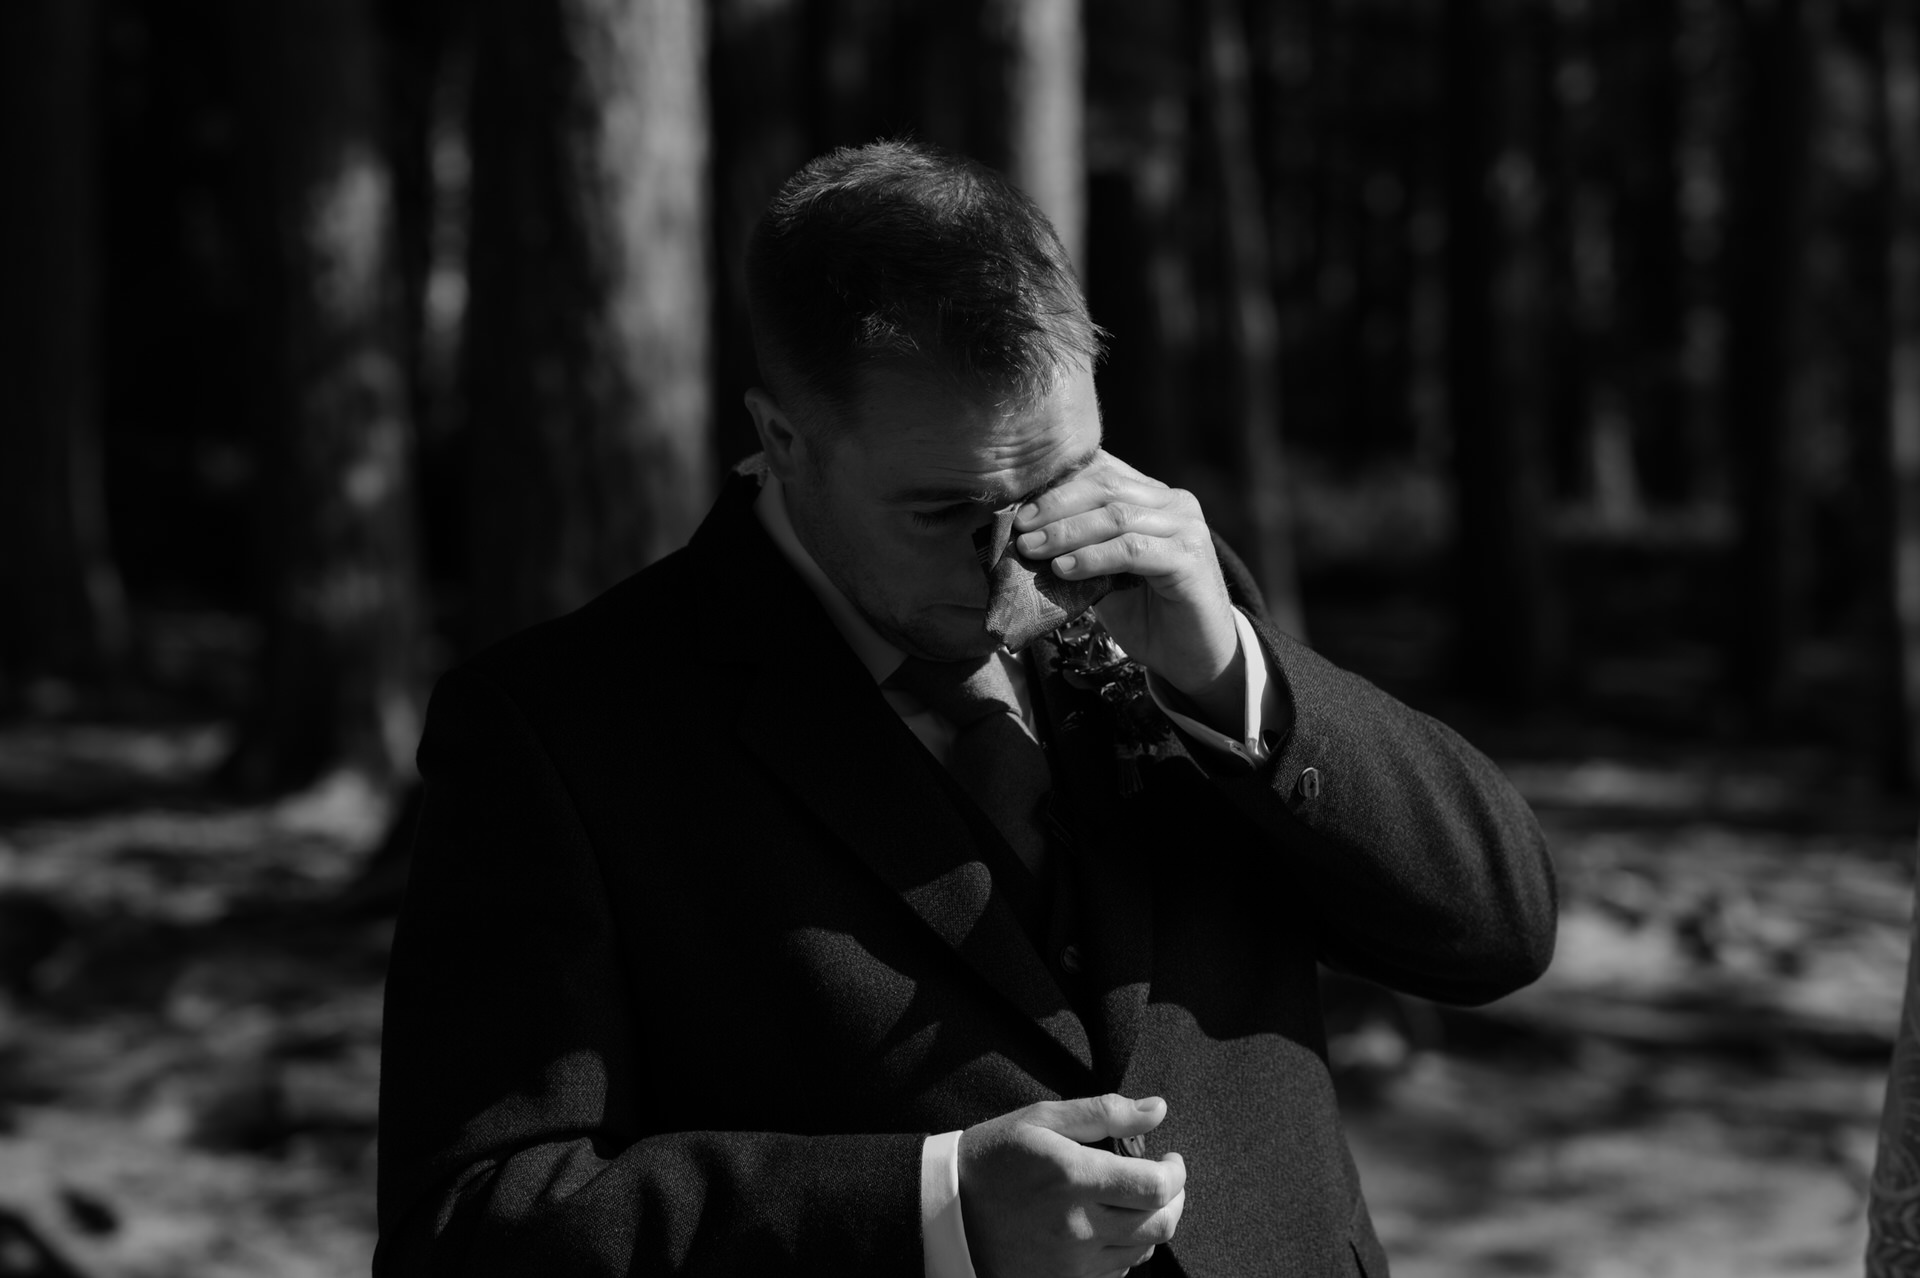 Groom crying during vow ceremony in Scotland